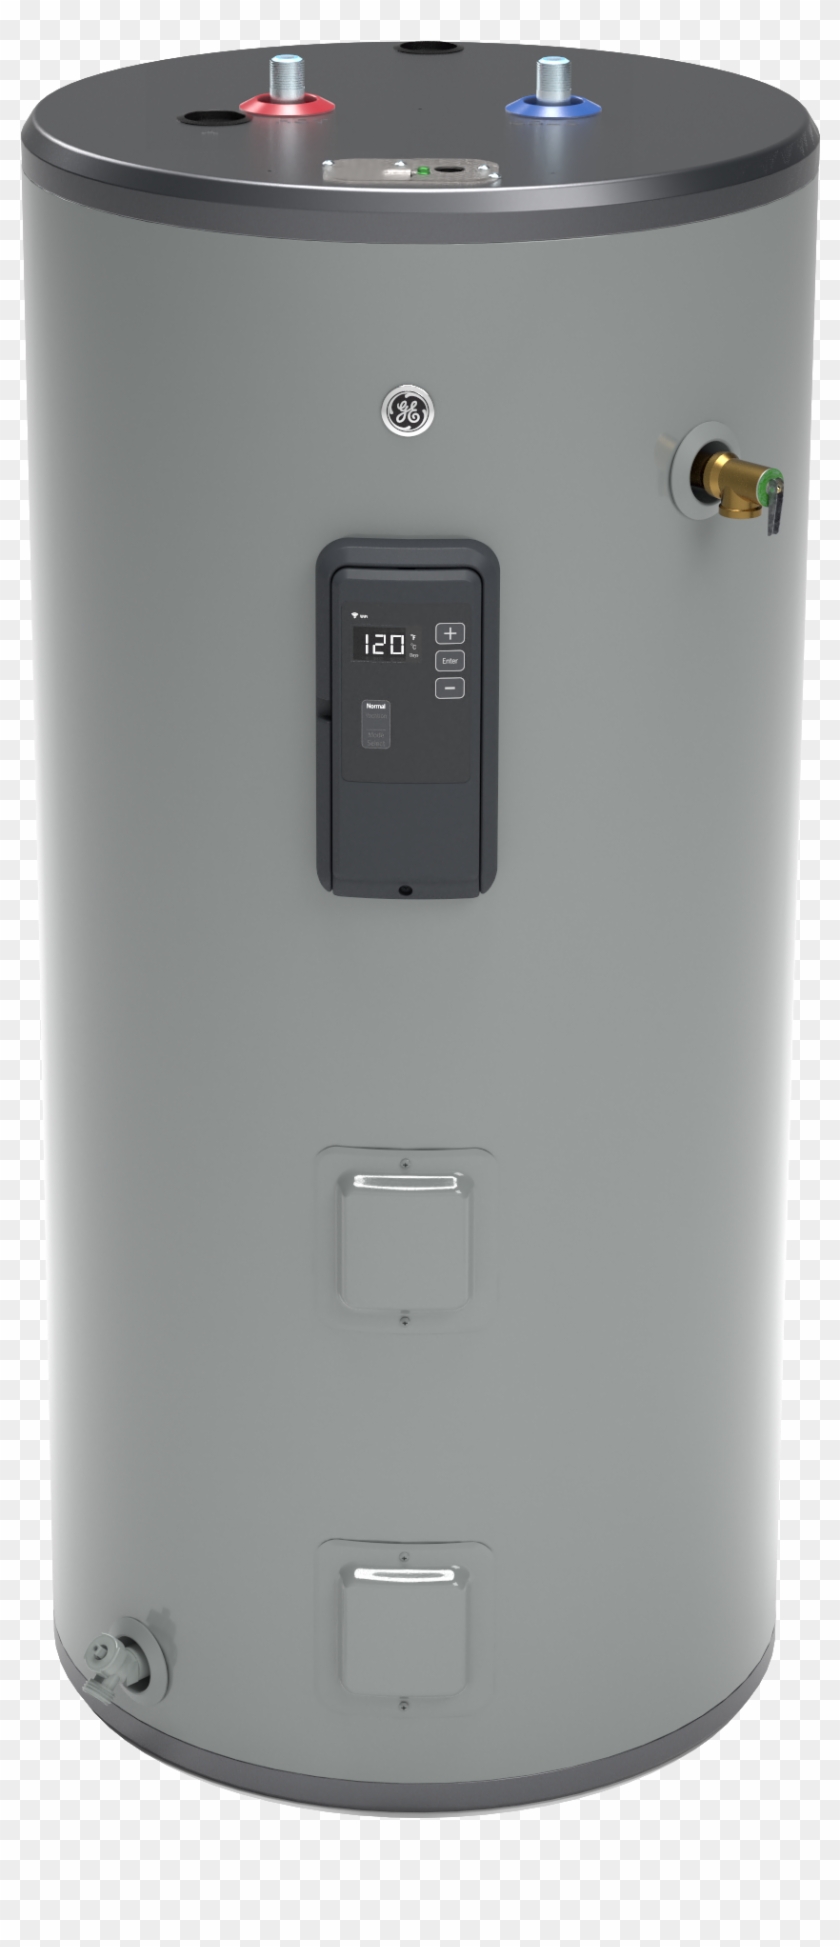 Thermostat Controlled Water Heater - Smartphone Clipart #4907600